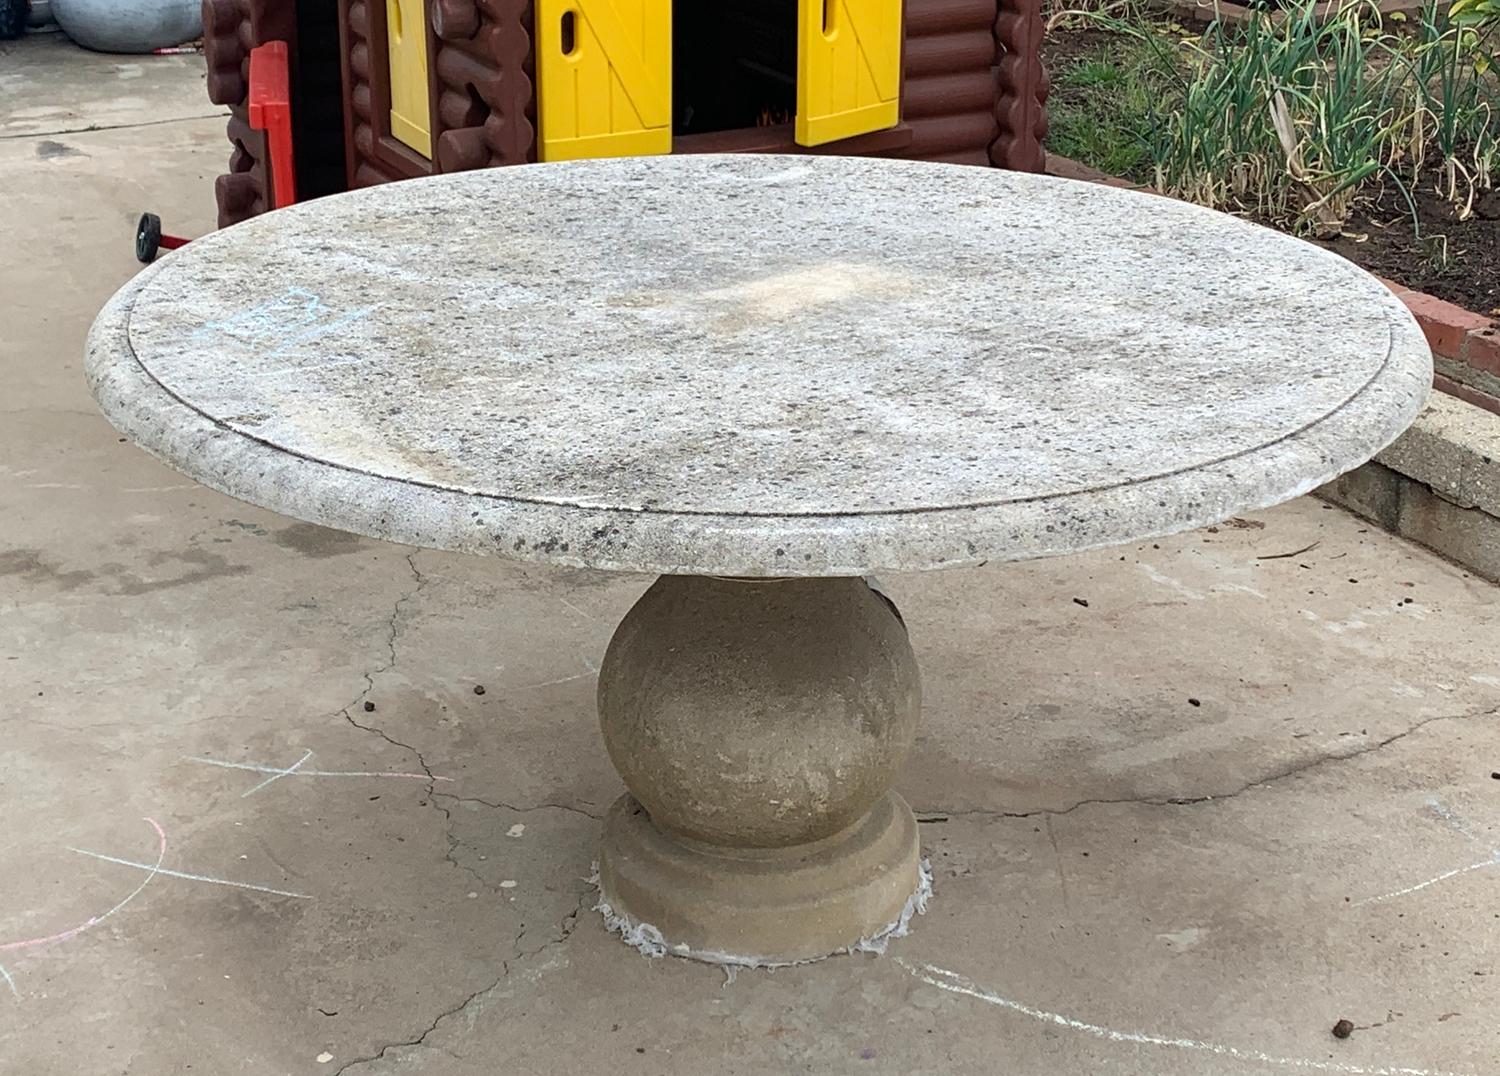 Stunning dining table is solid limestone by Treillage LTD.This table is very substantial, can be used indoor or outdoors, the table top has a knife edge design and is around 3-400 pounds The pedestal has a beautiful design and the top sits right on